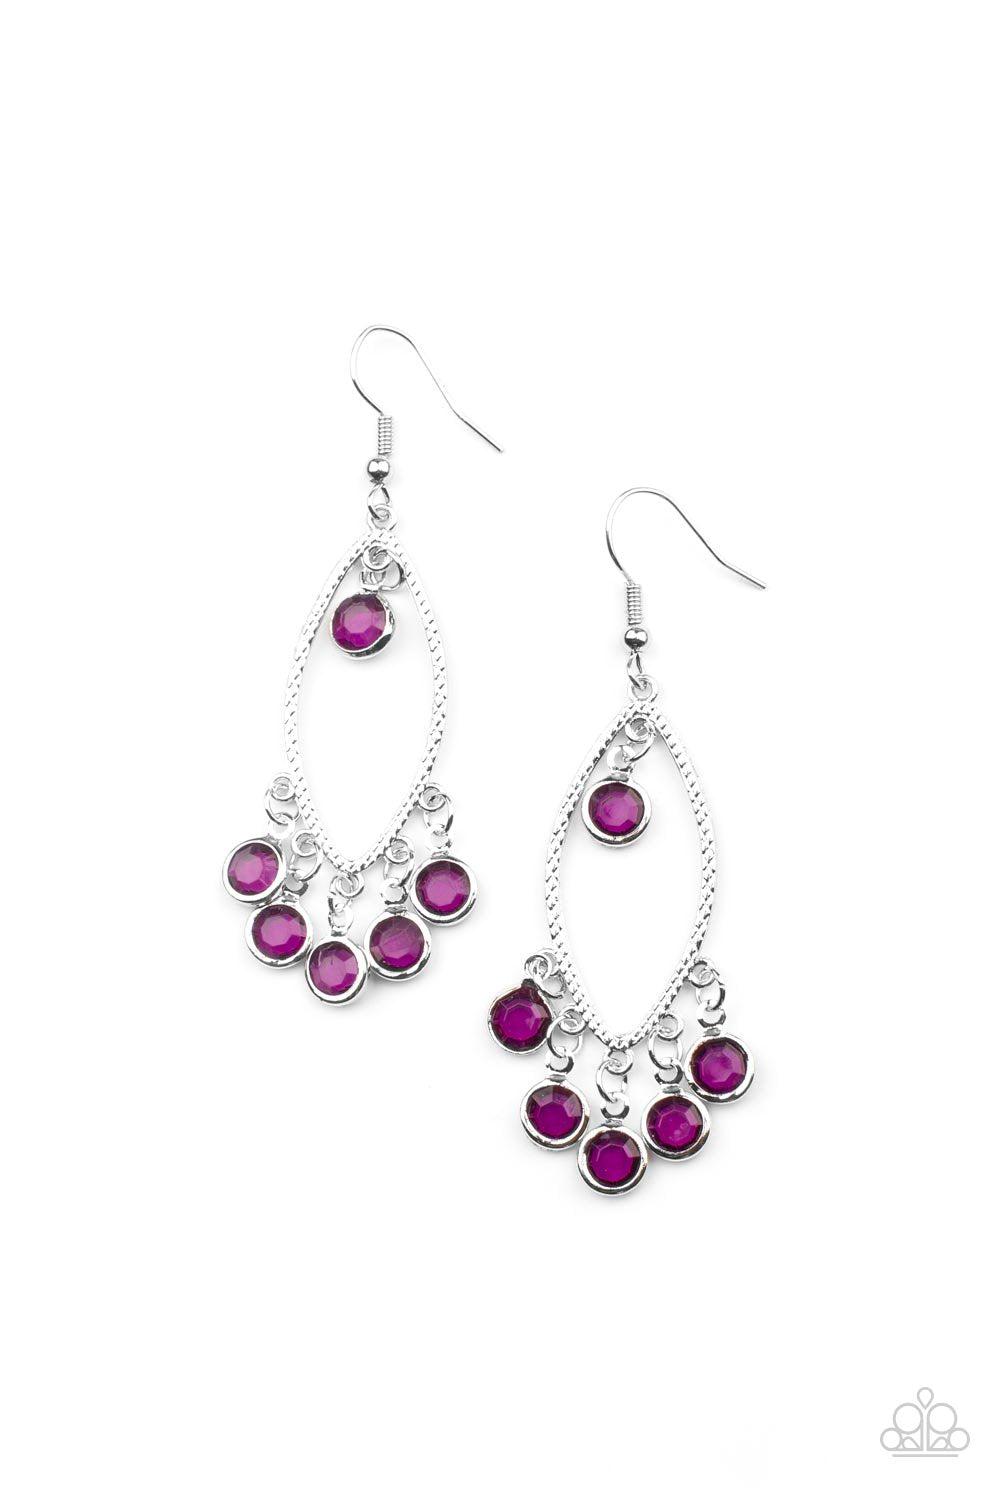 Glassy Grotto Purple Gem Earrings - Paparazzi Accessories- lightbox - CarasShop.com - $5 Jewelry by Cara Jewels